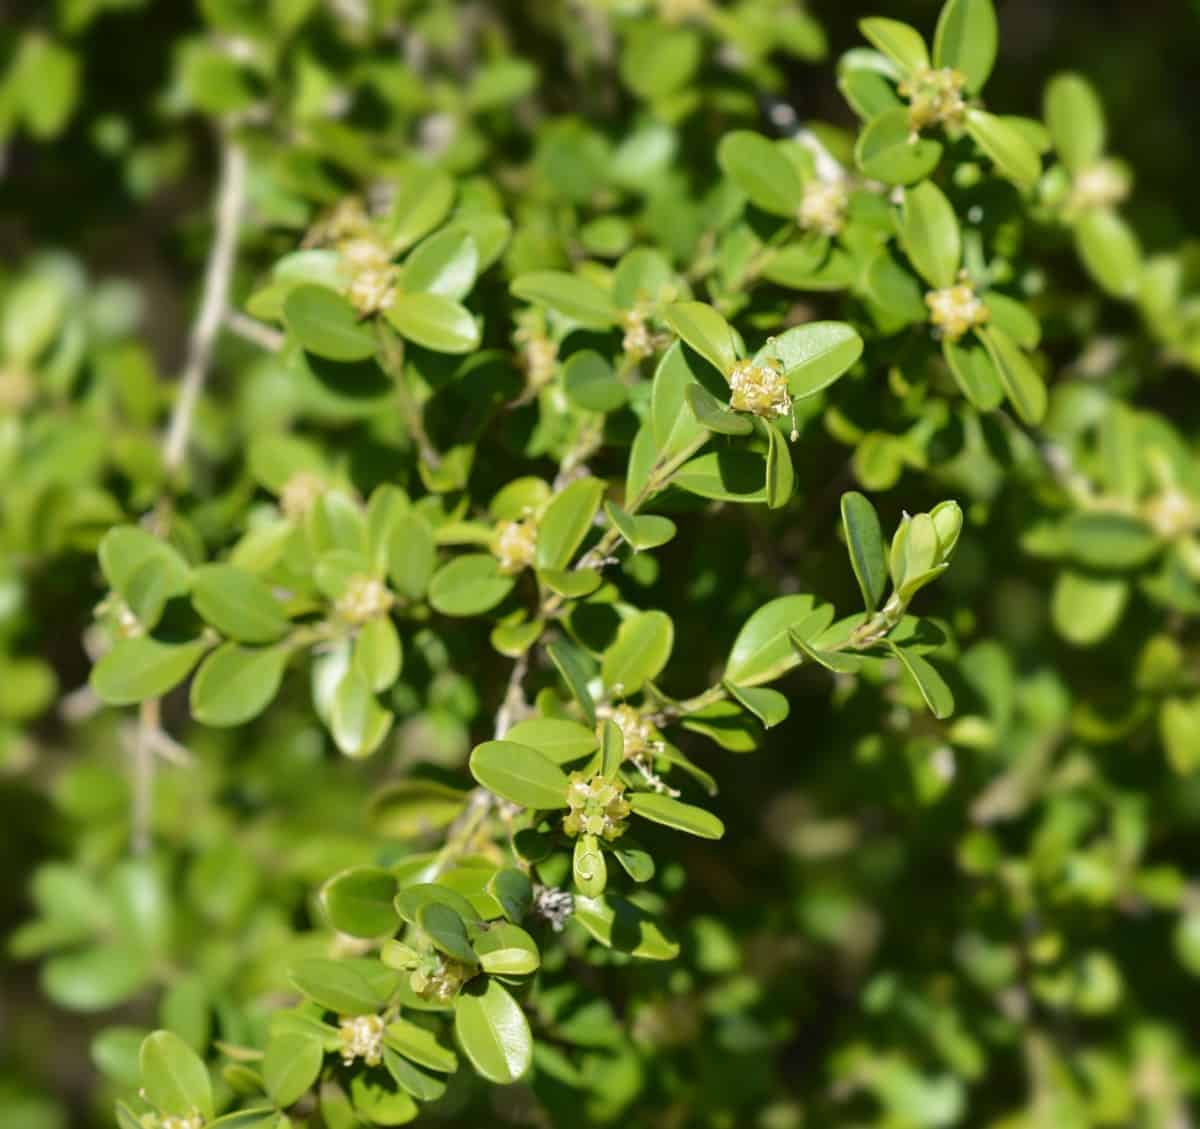 The leaves of the Japanese boxwood turn bronze in winter.